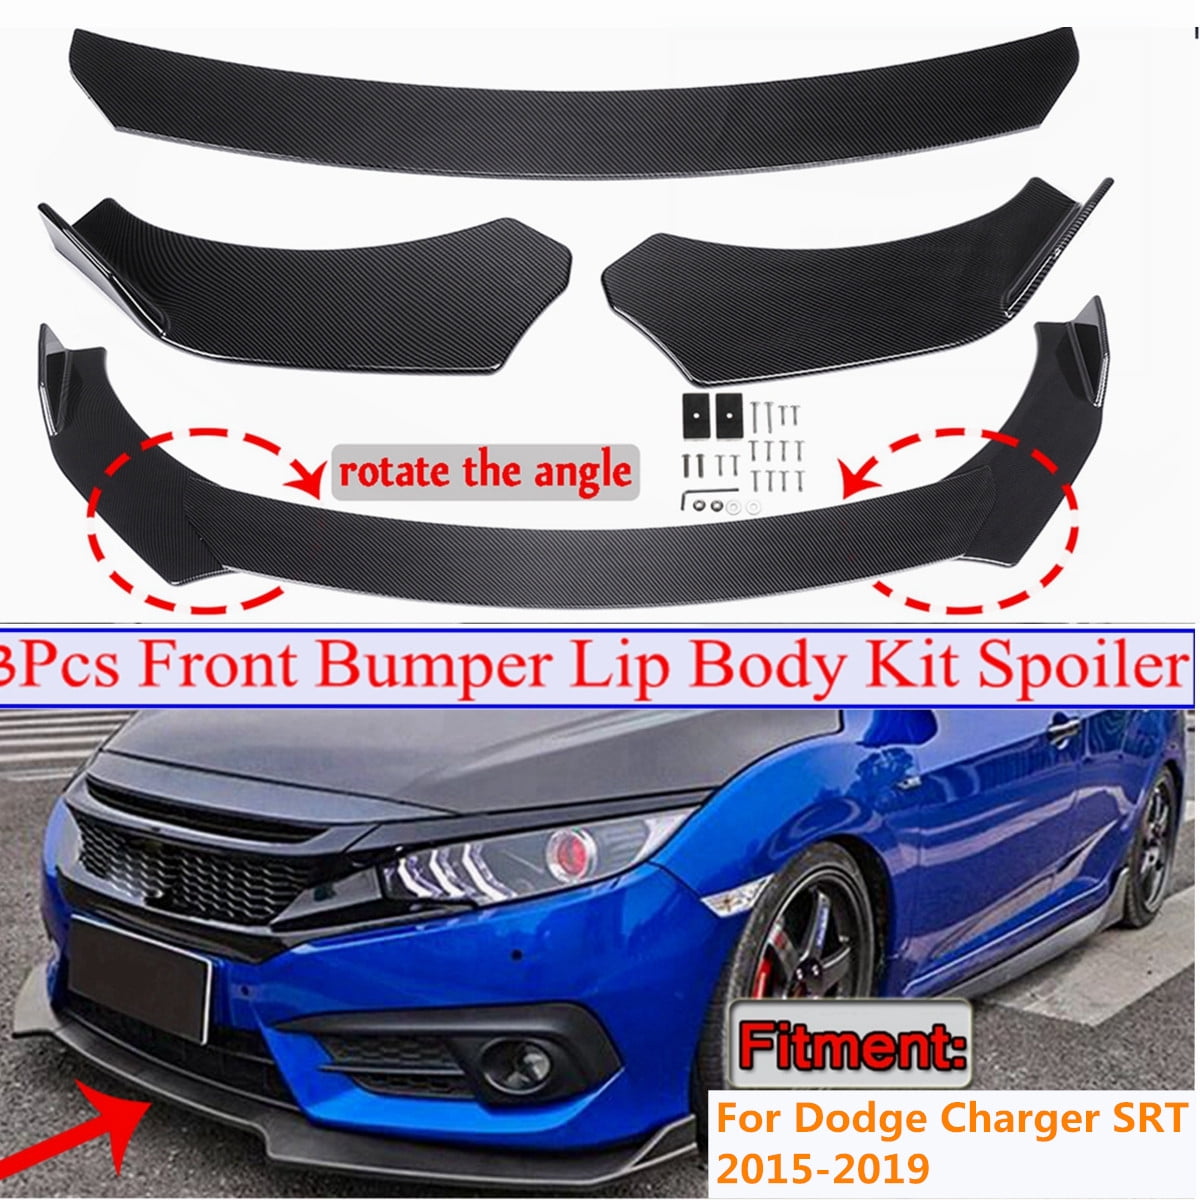 V2 Style Carbon Fiber Print ABS Plastic Front Air Dam Chin Splitter Lower Protector 3PCS FREEMOTOR802 Compatible With 2015-2022 Dodge Charger SRT Front Bumper Lip 